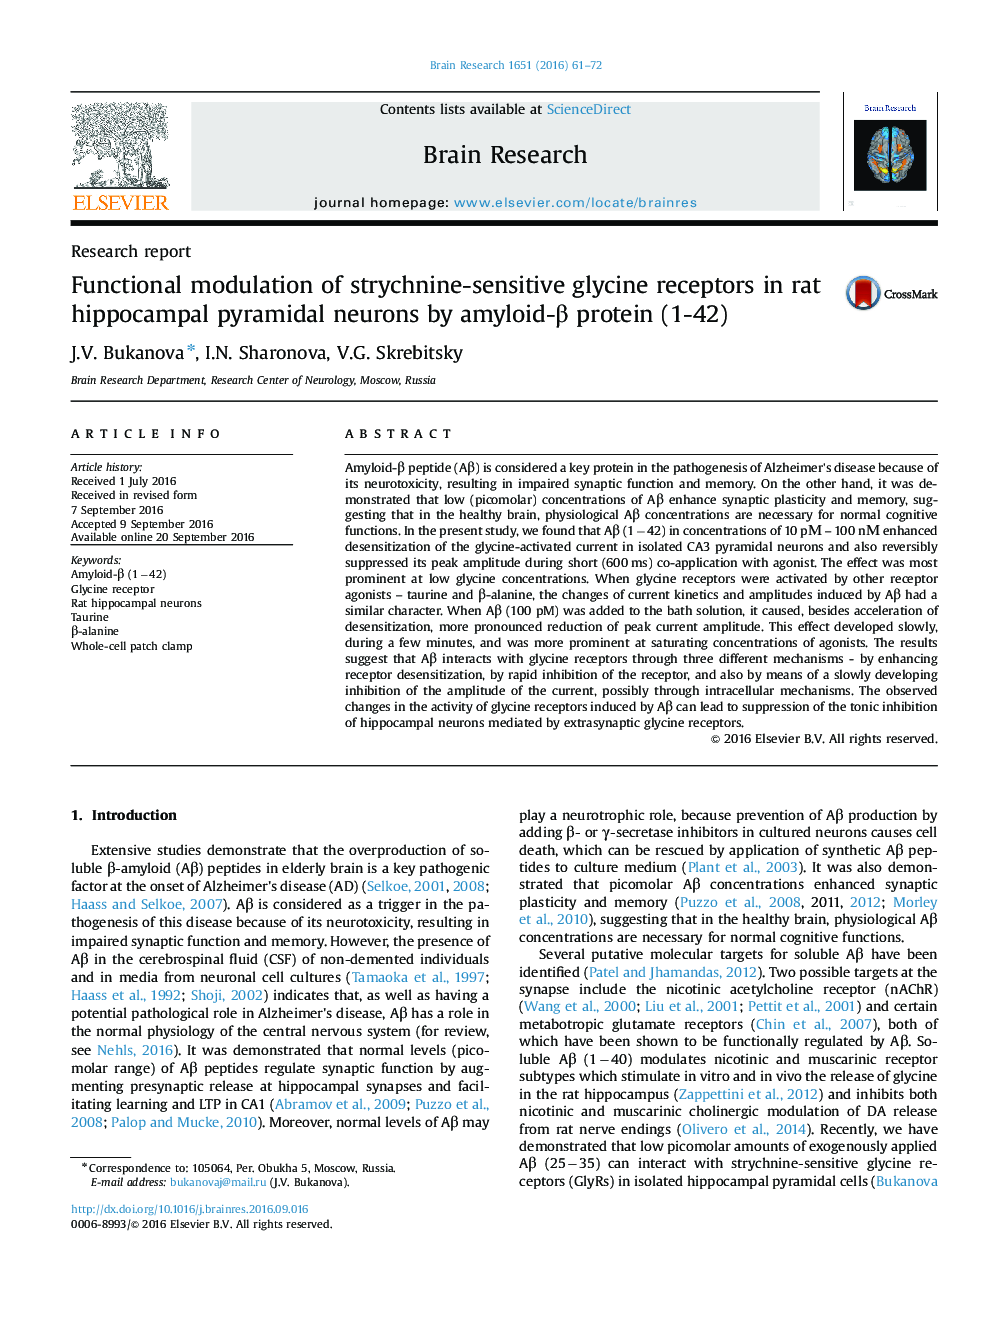 Research reportFunctional modulation of strychnine-sensitive glycine receptors in rat hippocampal pyramidal neurons by amyloid-Î² protein (1-42)